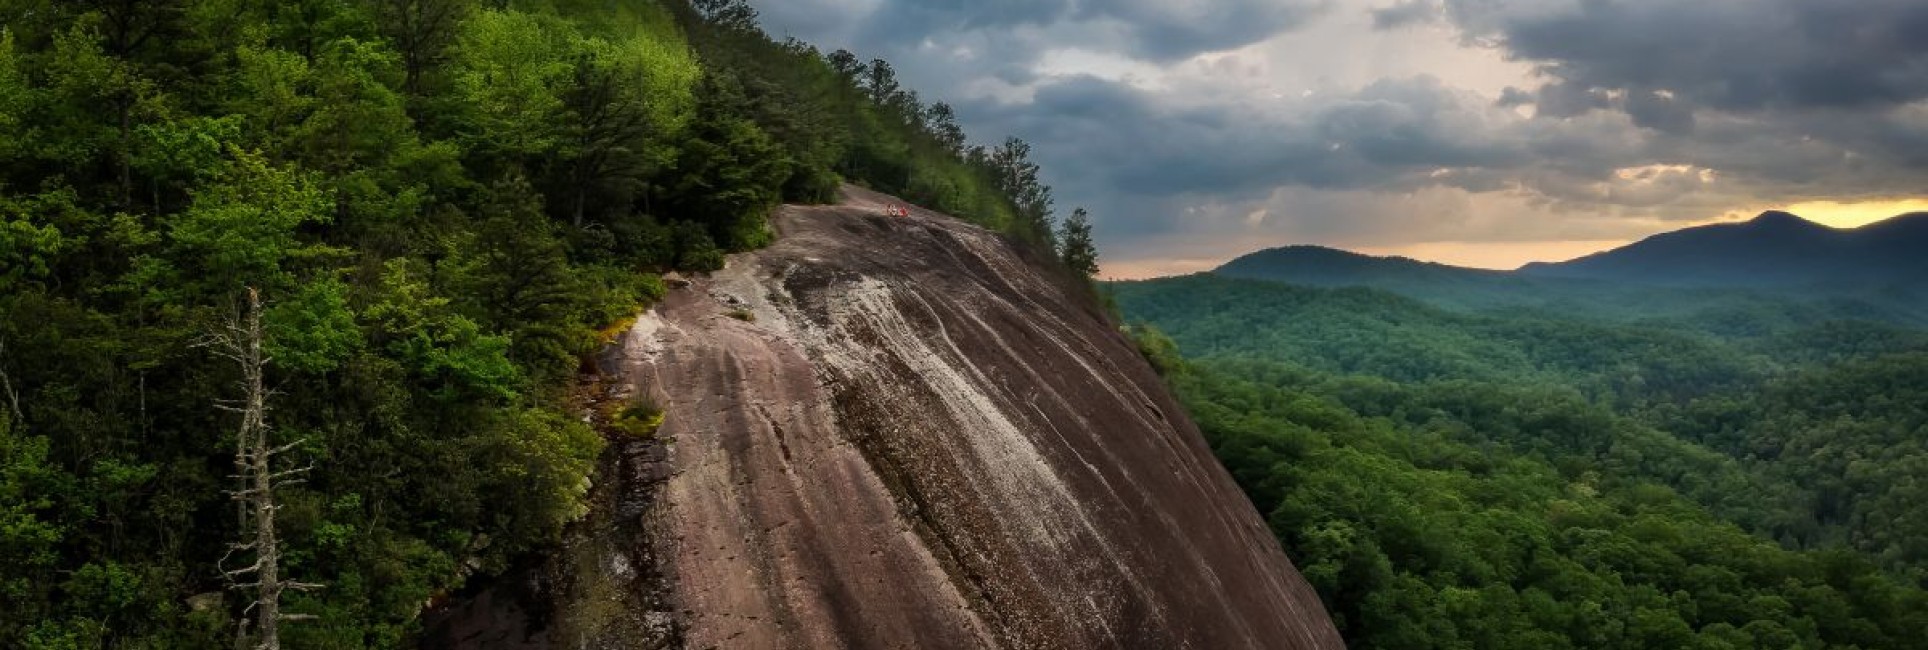 Looking Glass Rock, provided by Transylvania Tourism Authority